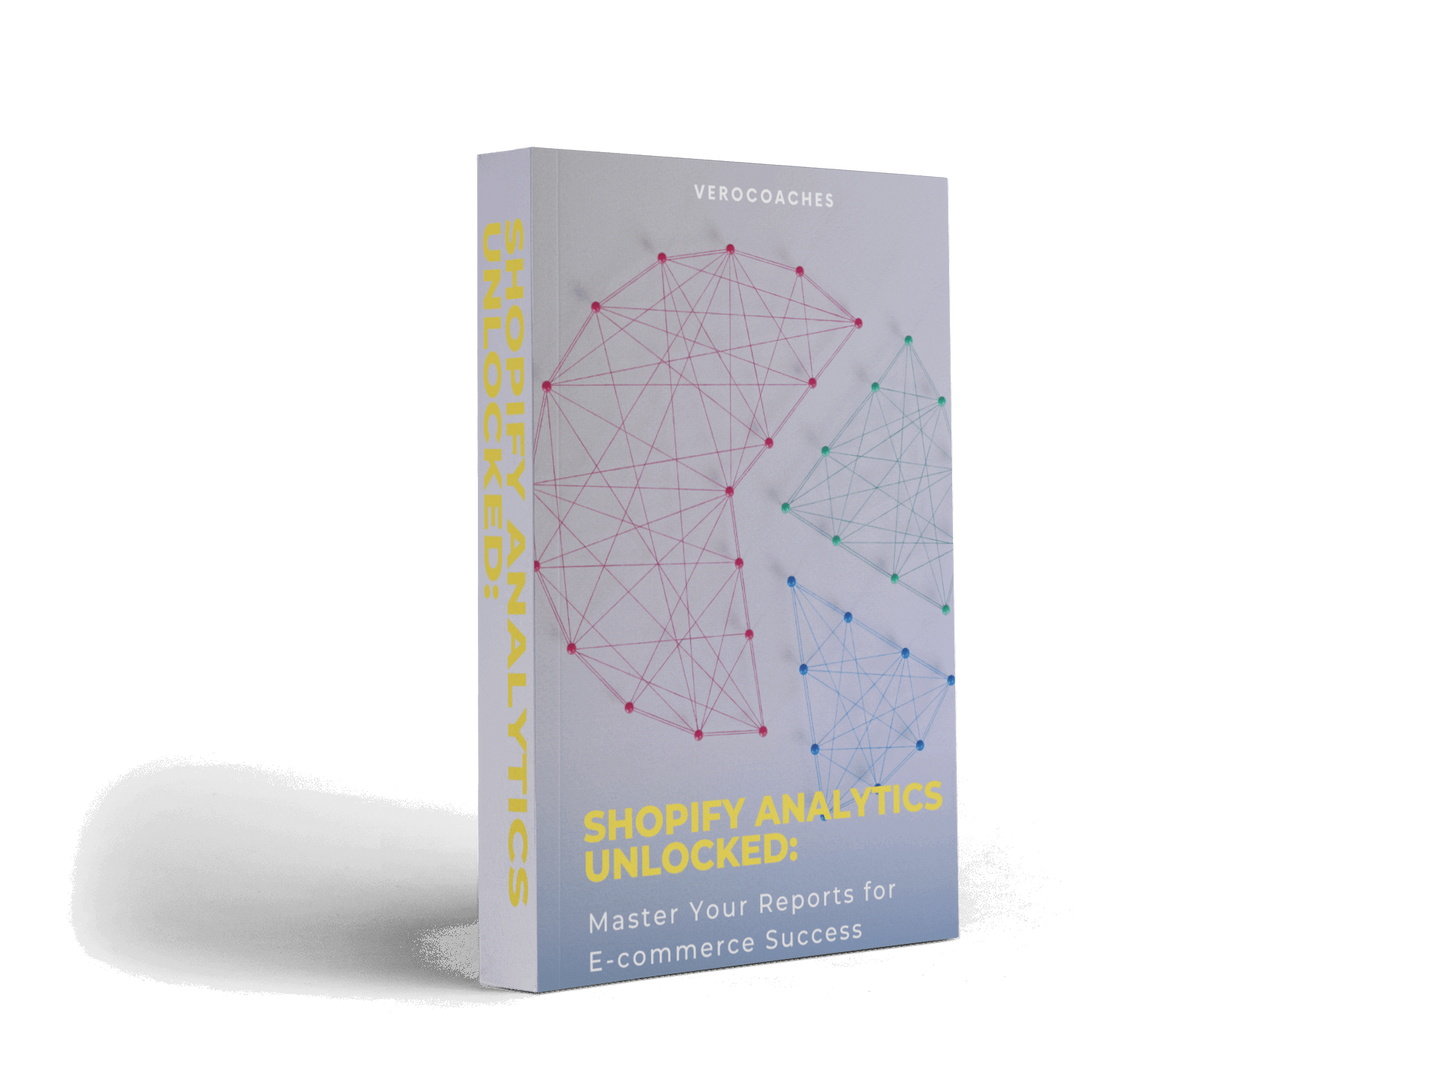 Cover of 'Shopify Analytics Unlocked' book, the key to mastering e-commerce reports